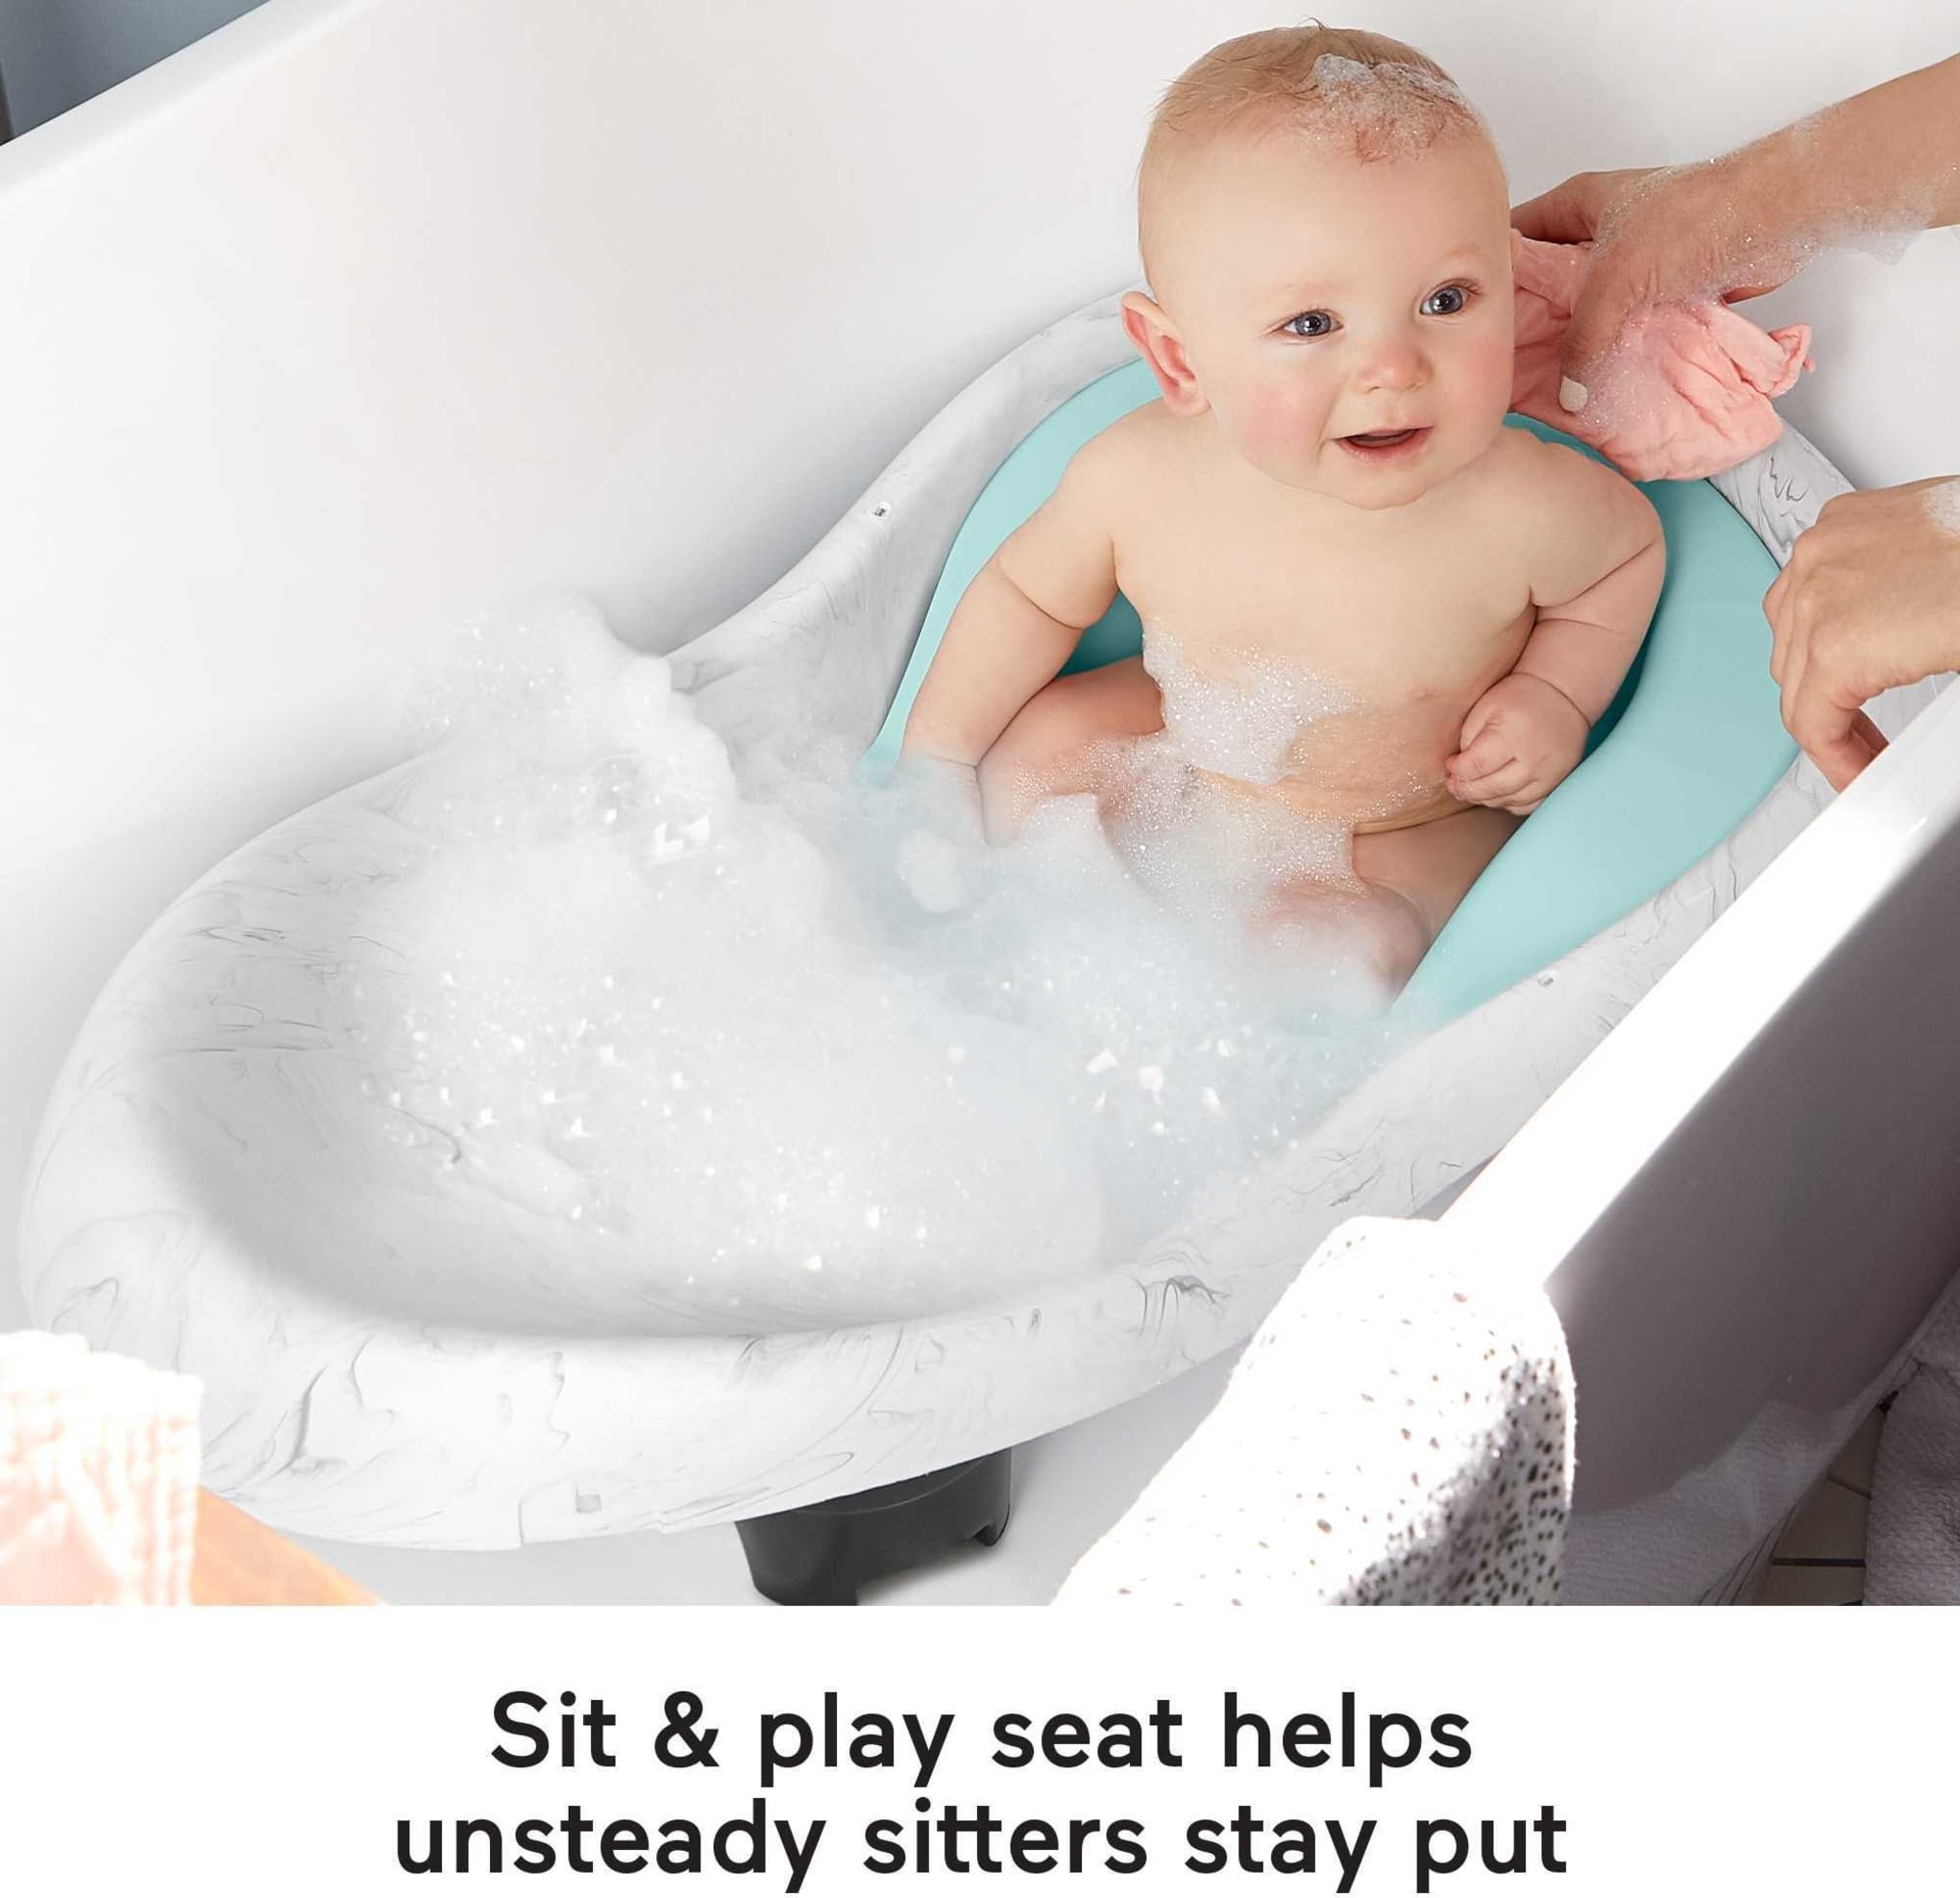 Fisher-Price Baby Deluxe 4-in-1 Sling 'N Seat Tub, Convertible Baby Bathtub with Support and Seat